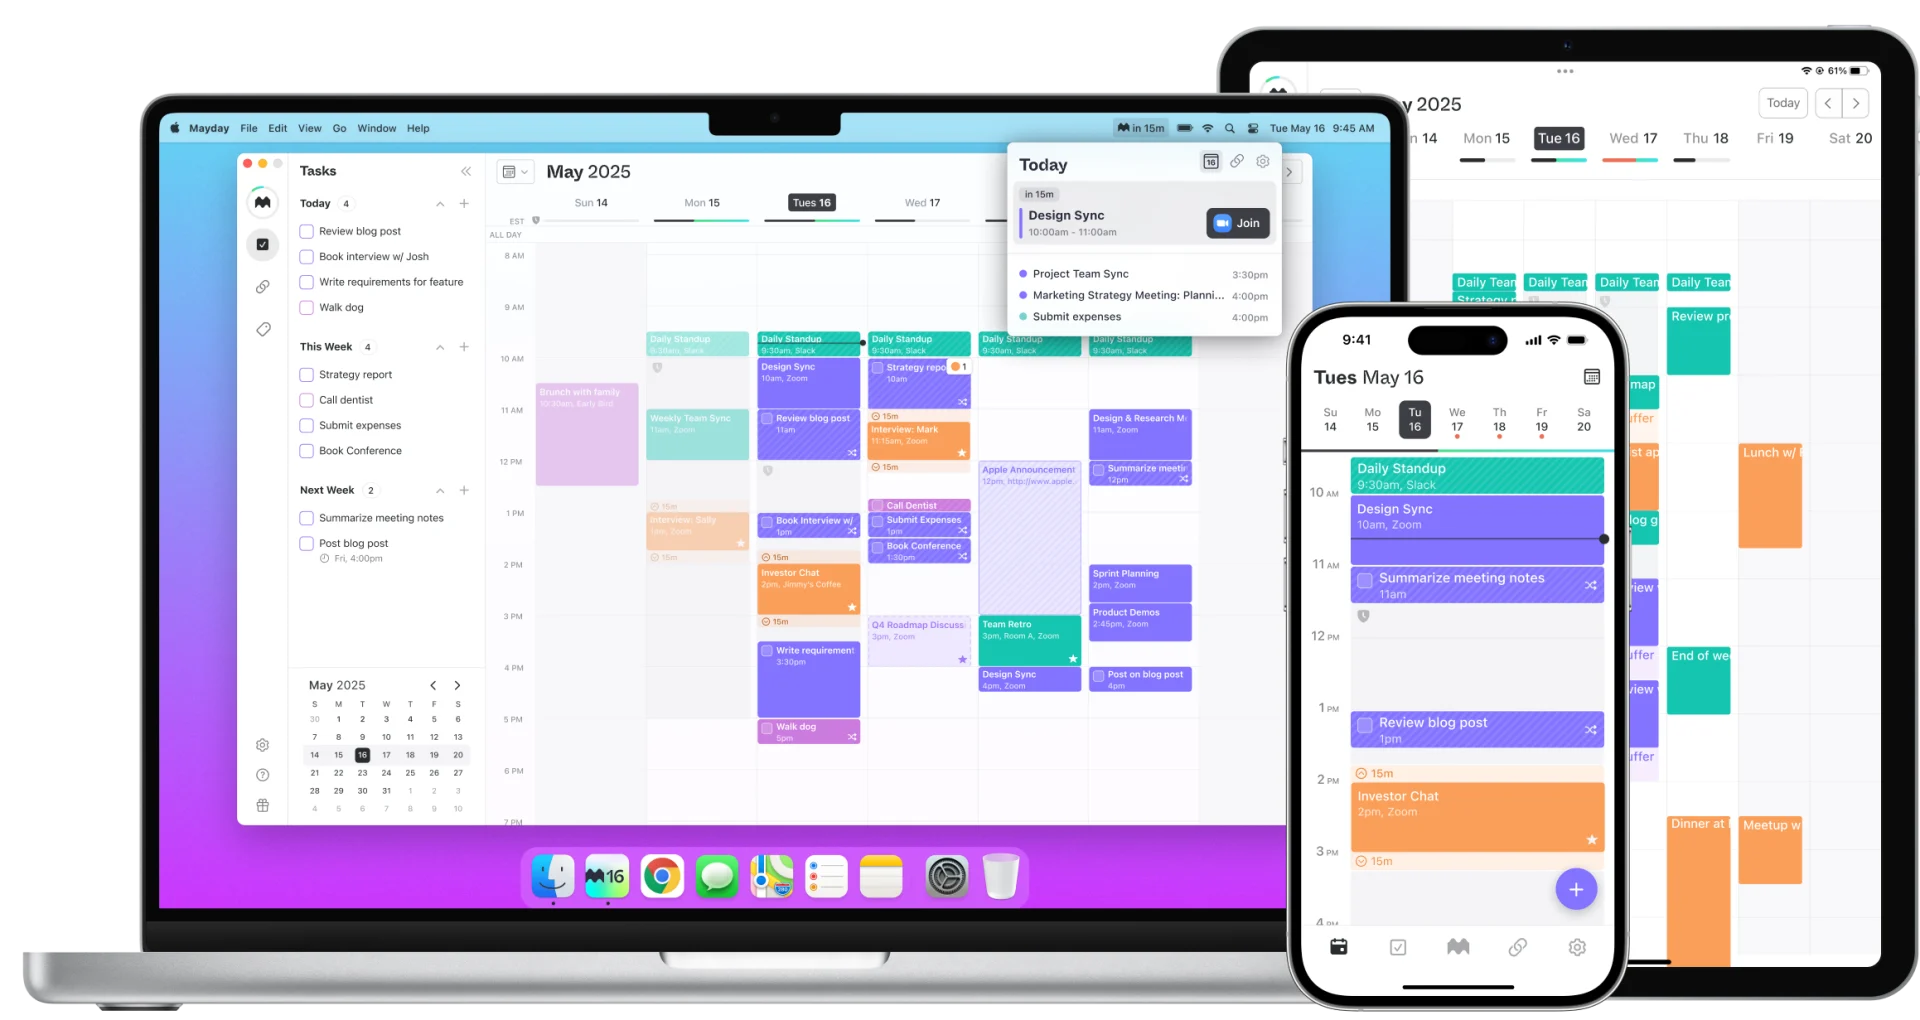 Handle your calendar and meetings with Mayday on mac and mobile